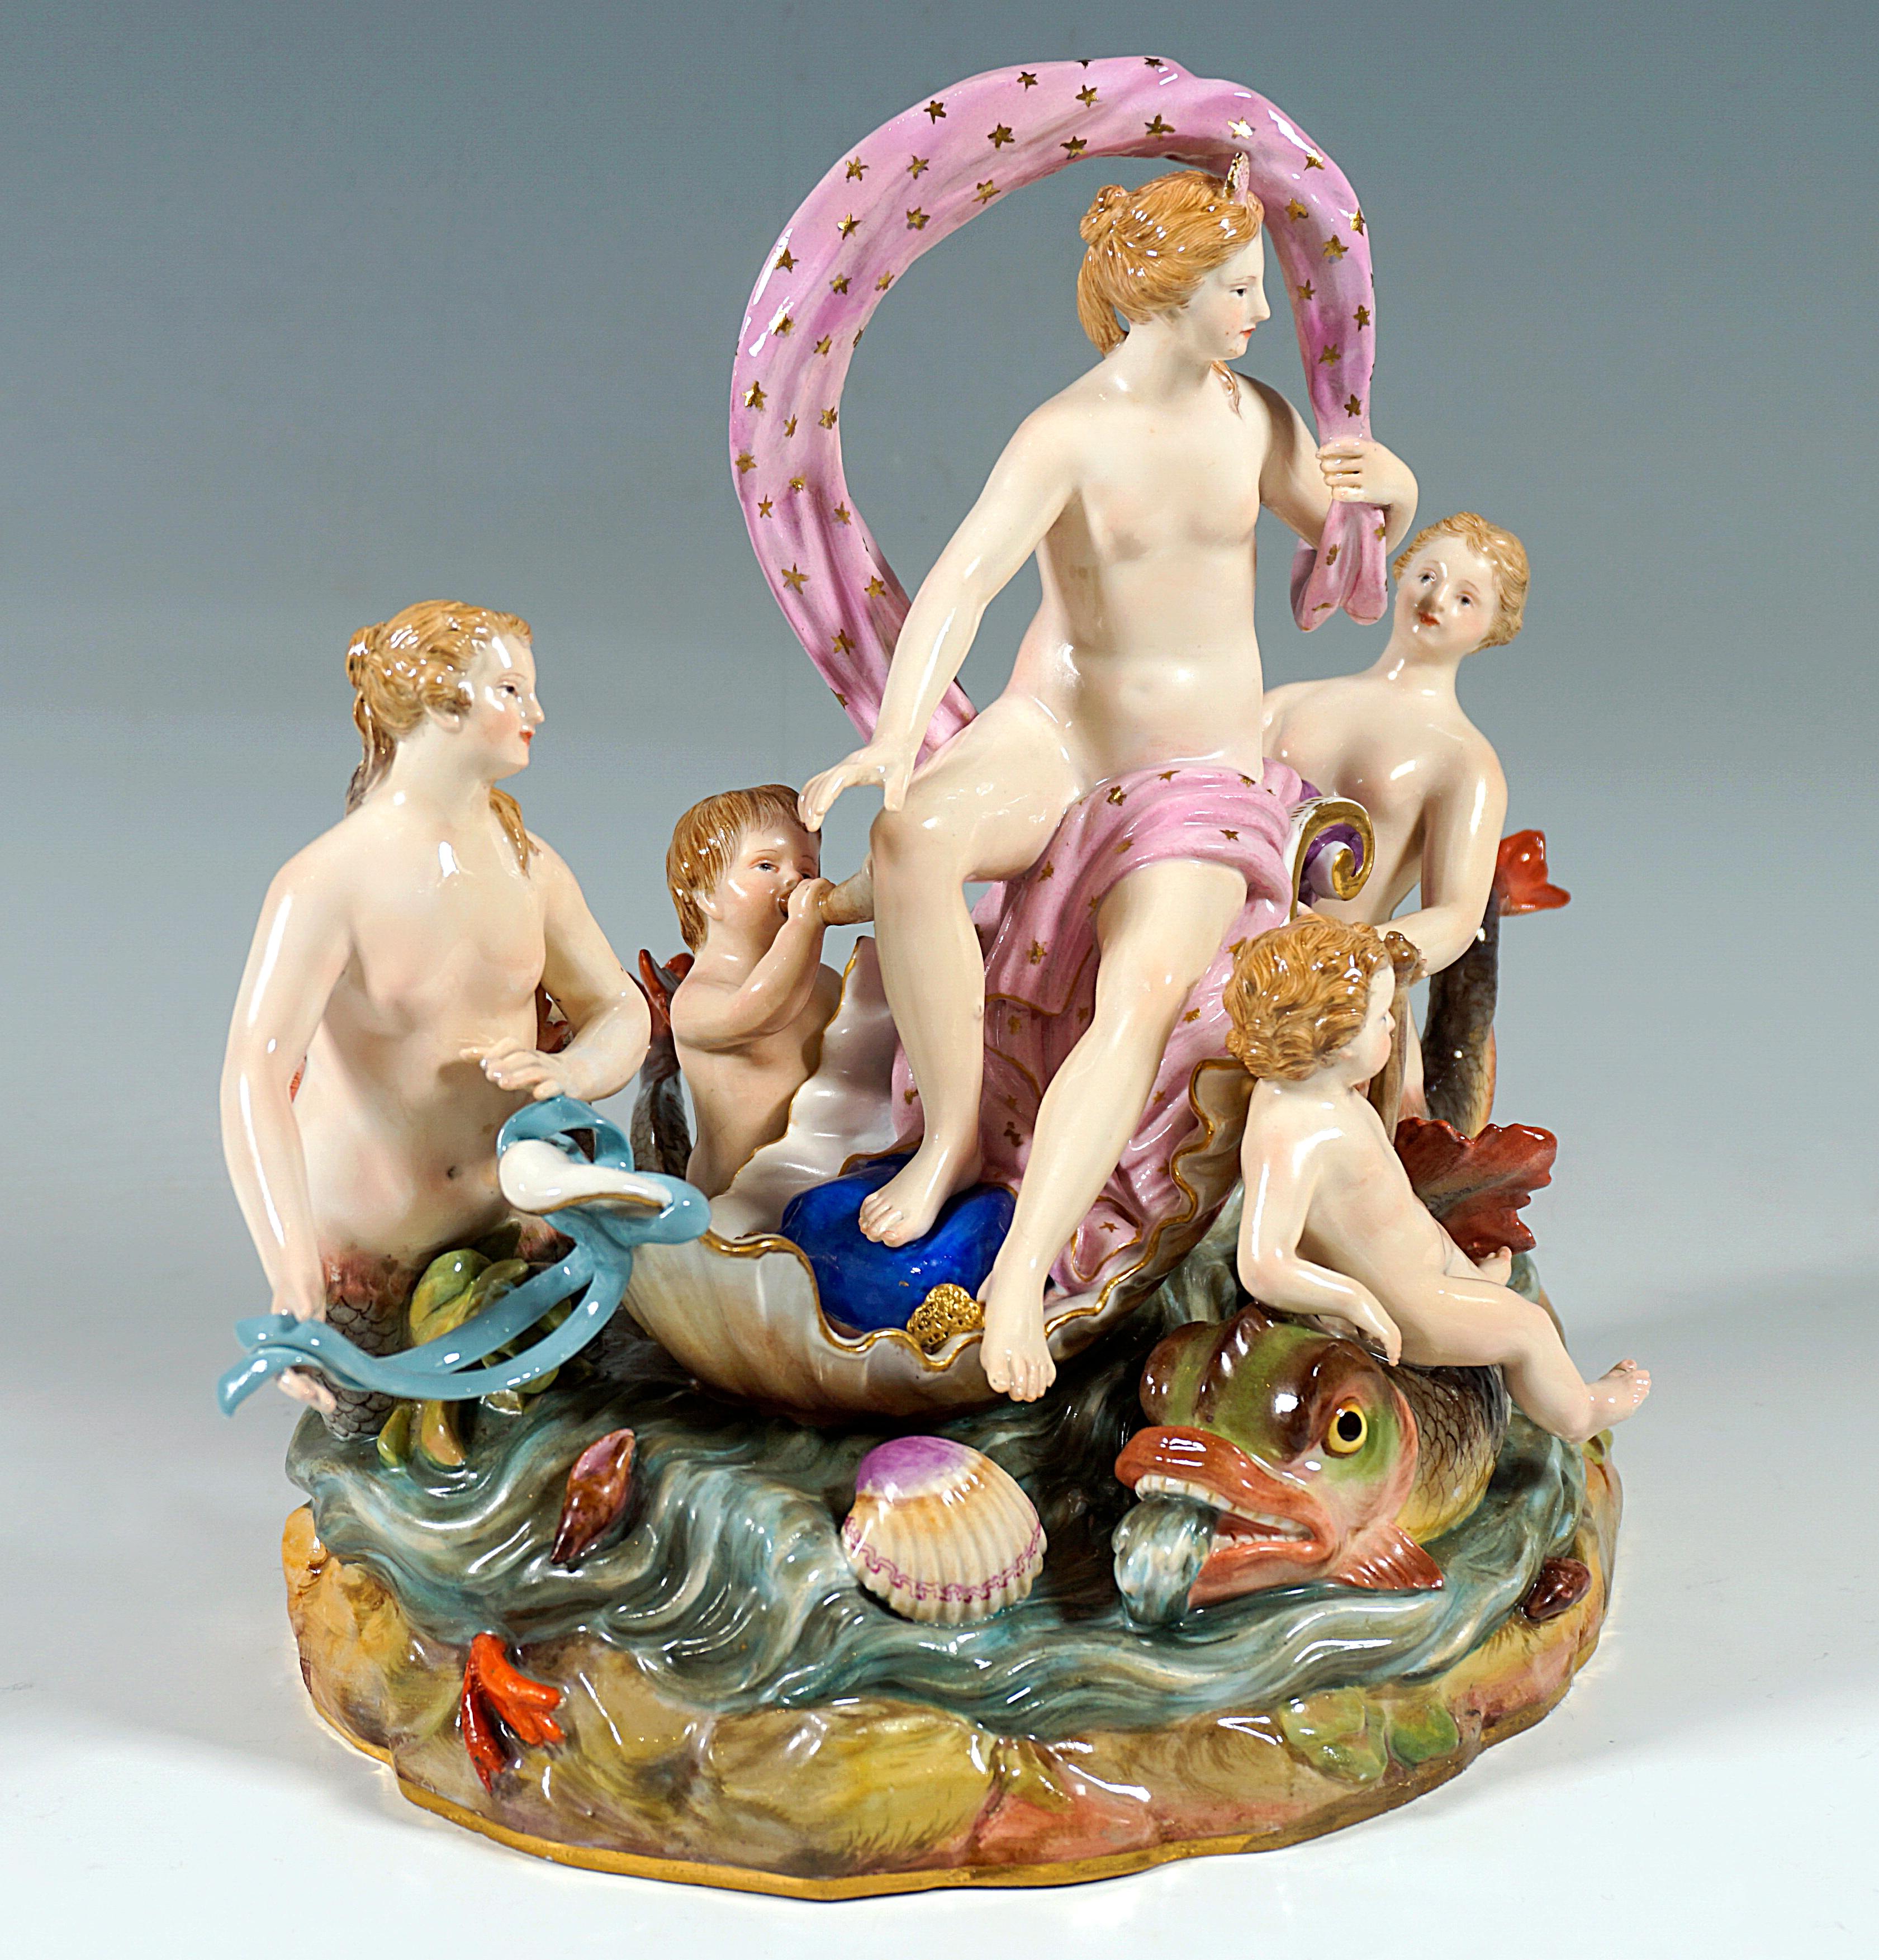 Excellent Meissen porcelain group of the 19th century:
Nymph, covered only with a cloth, seated on a half shell floating on the water, holding the cloth at one end so that it forms a wavy noose over her body, accompanied by three sirens, two girls